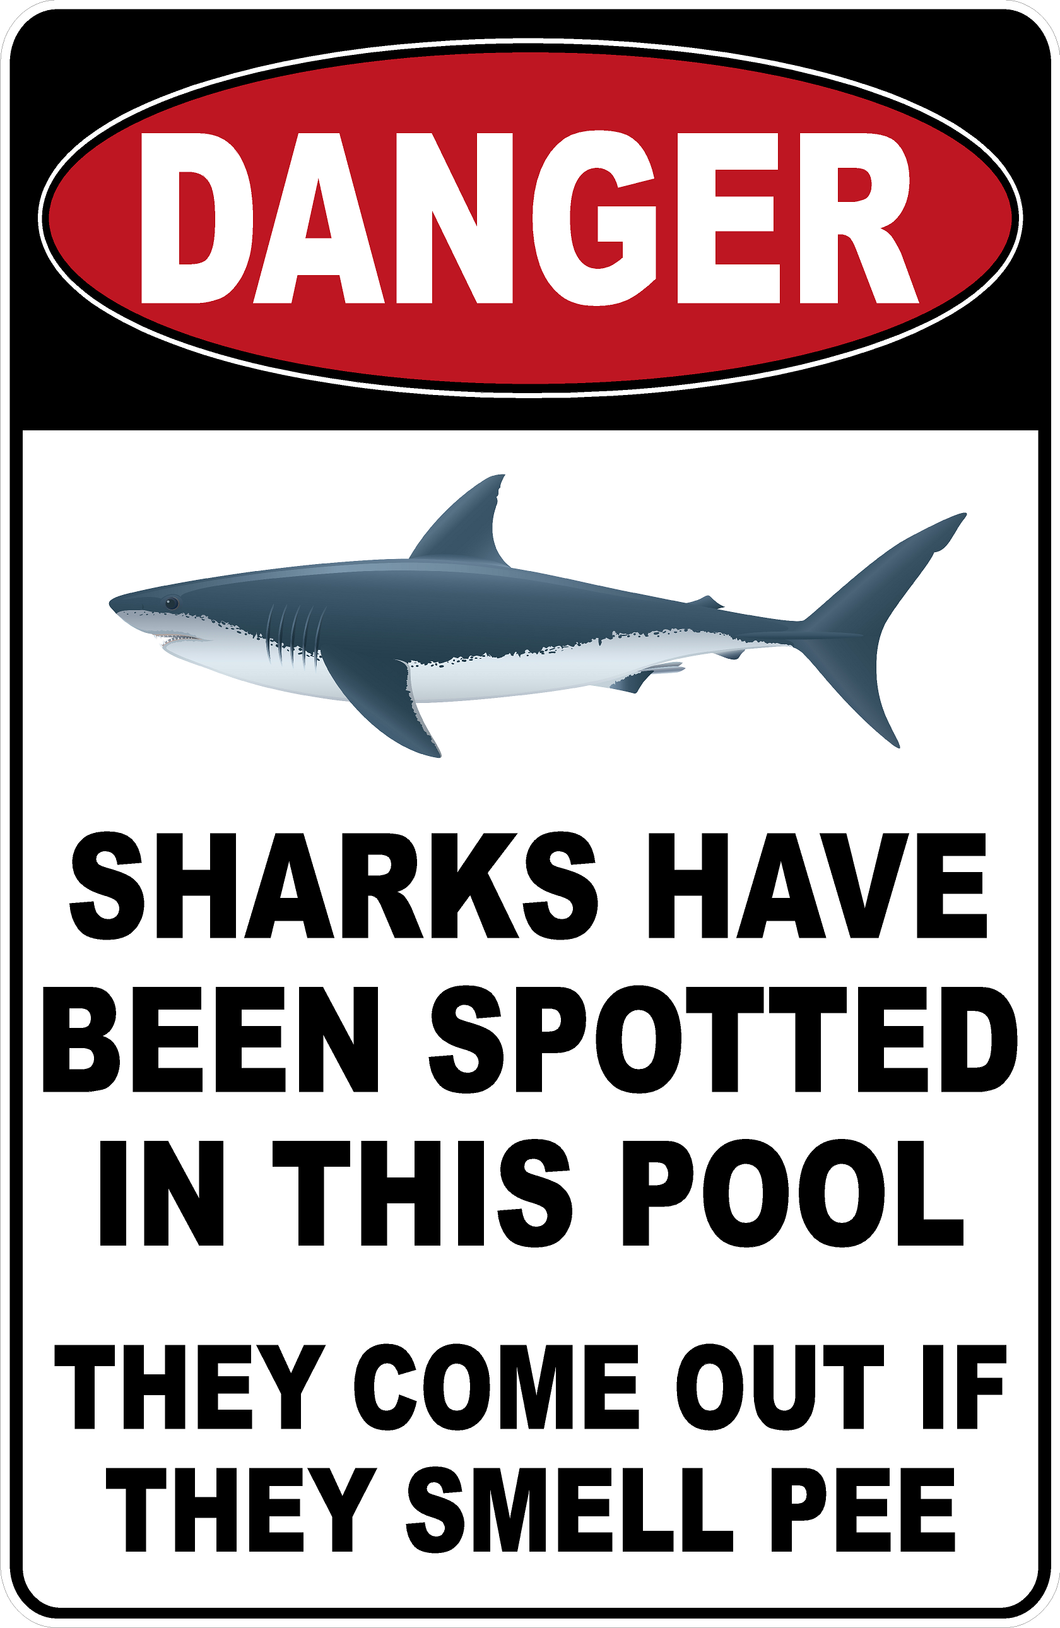 Danger Sharks Have Been Spotted in This Pool Sign